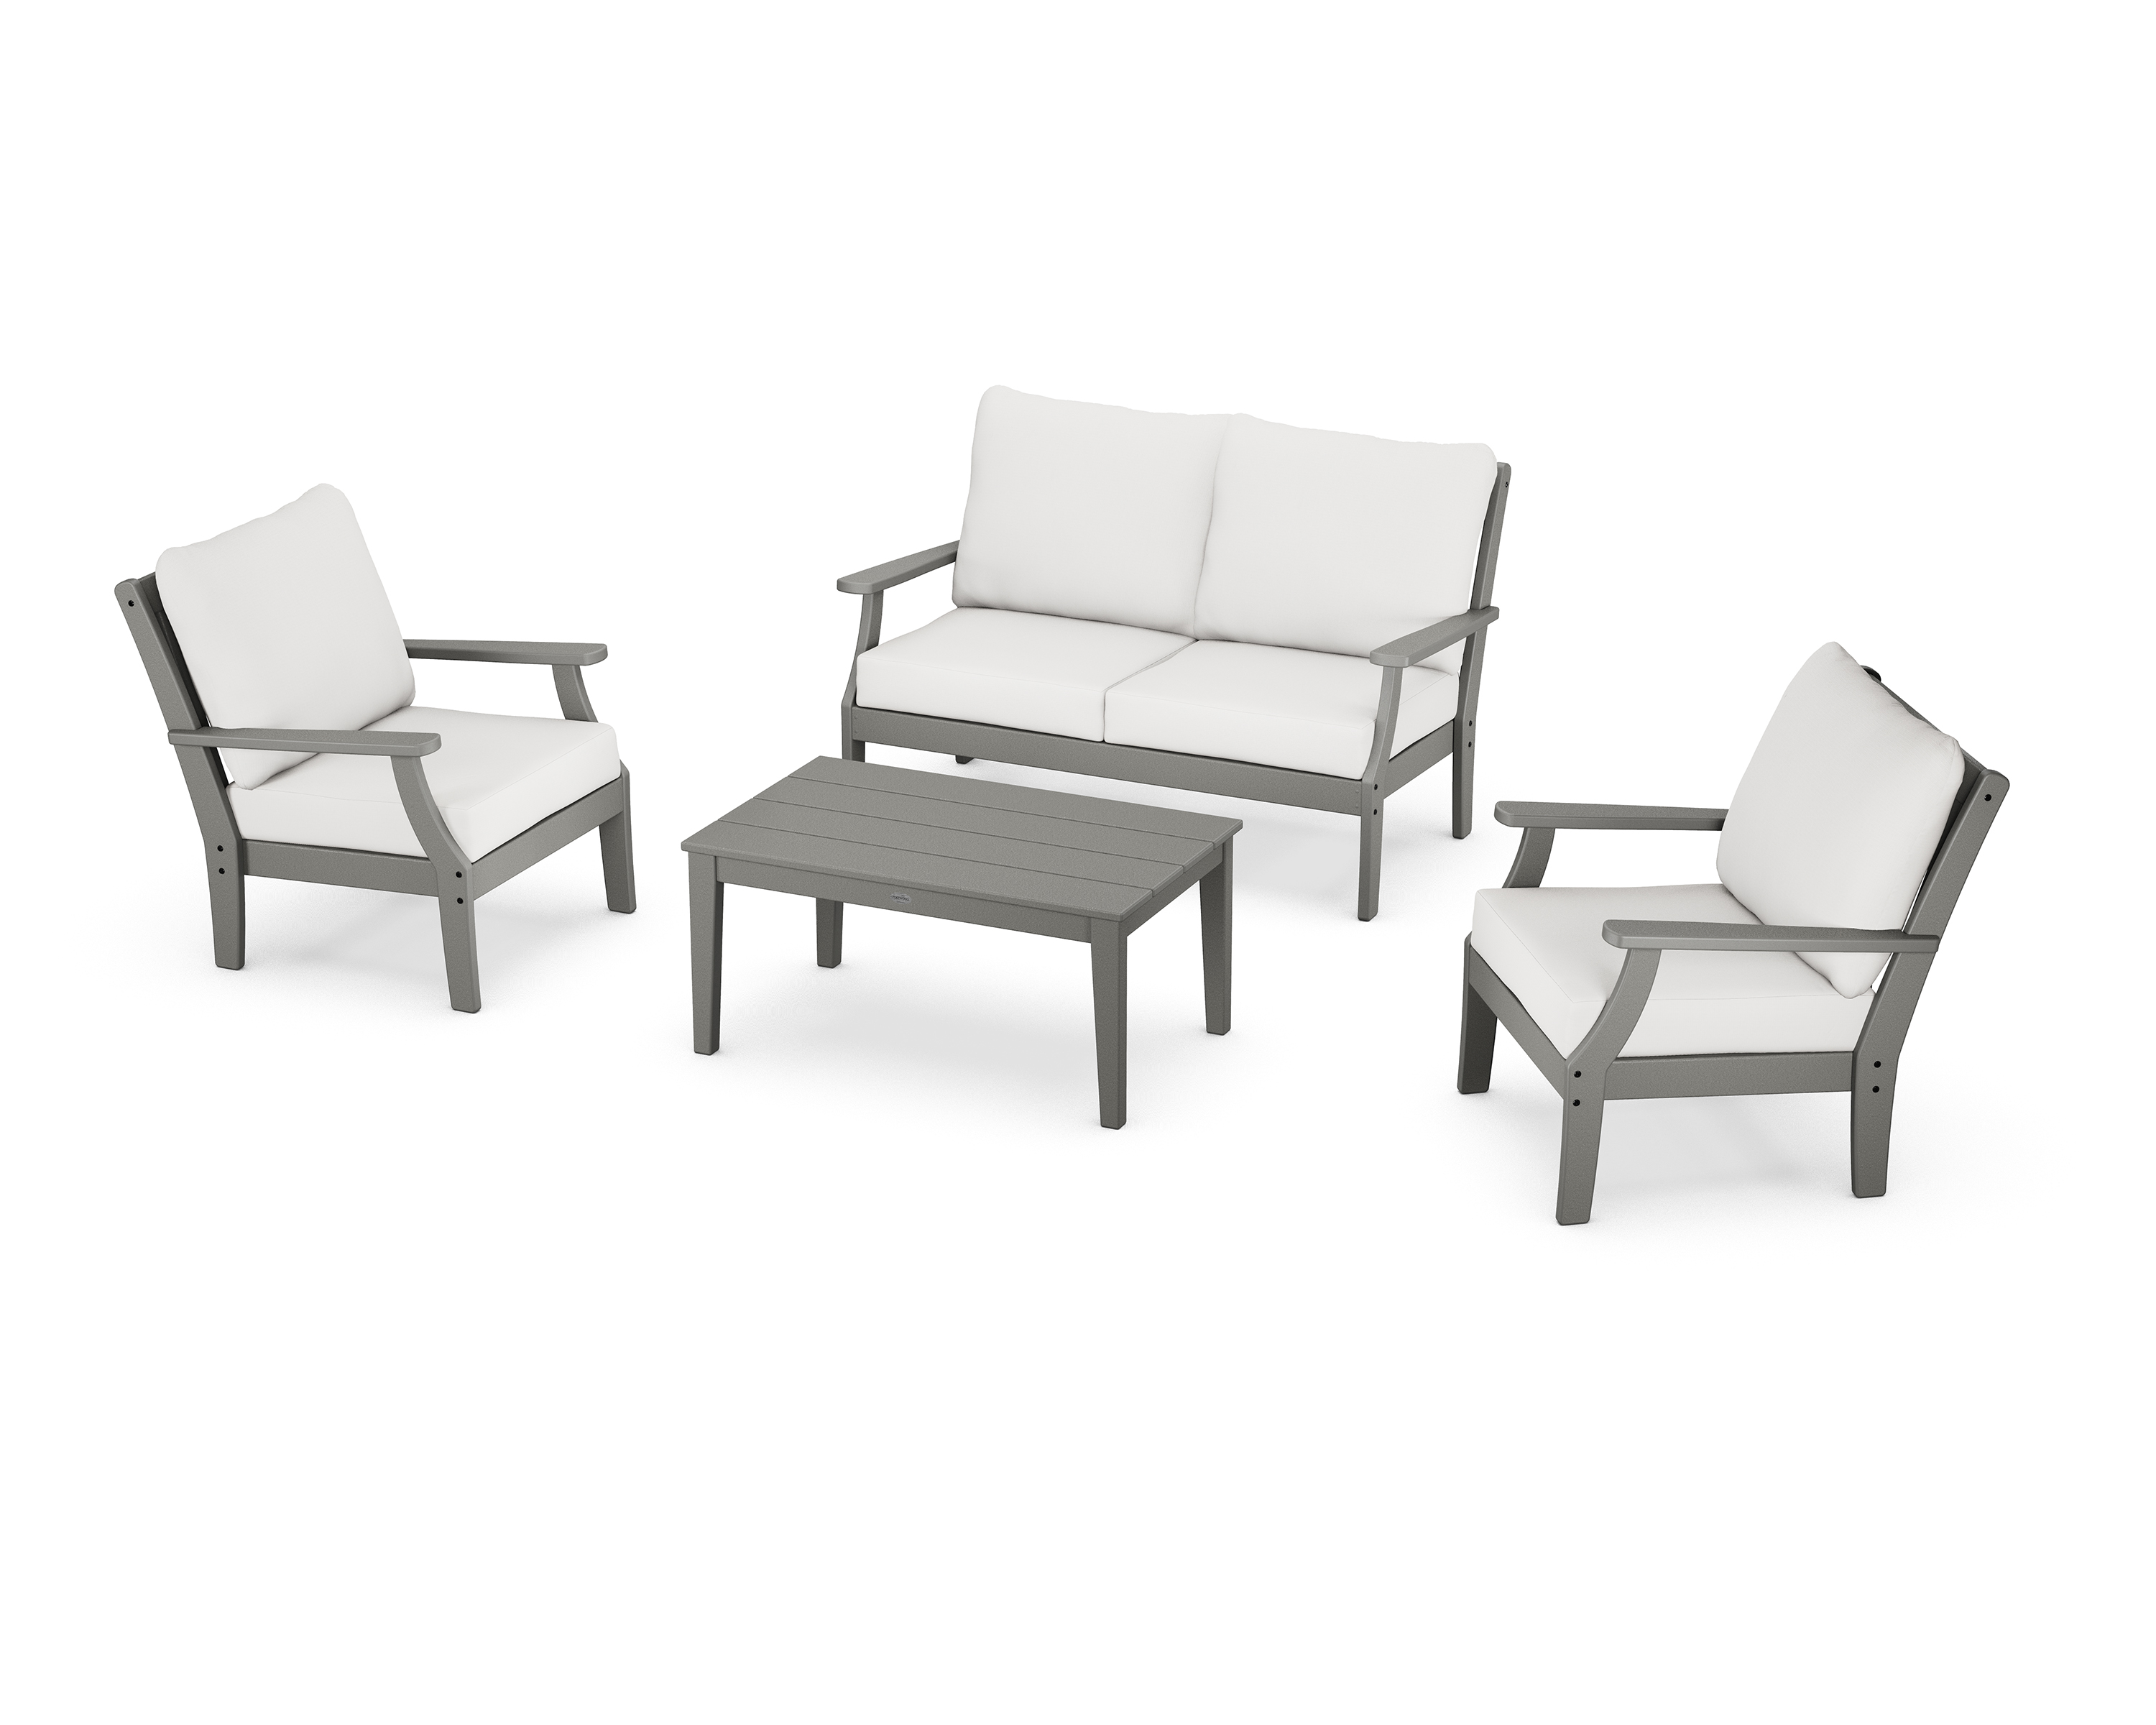 braxton 4-piece deep seating chair set in slate grey / textured linen product image